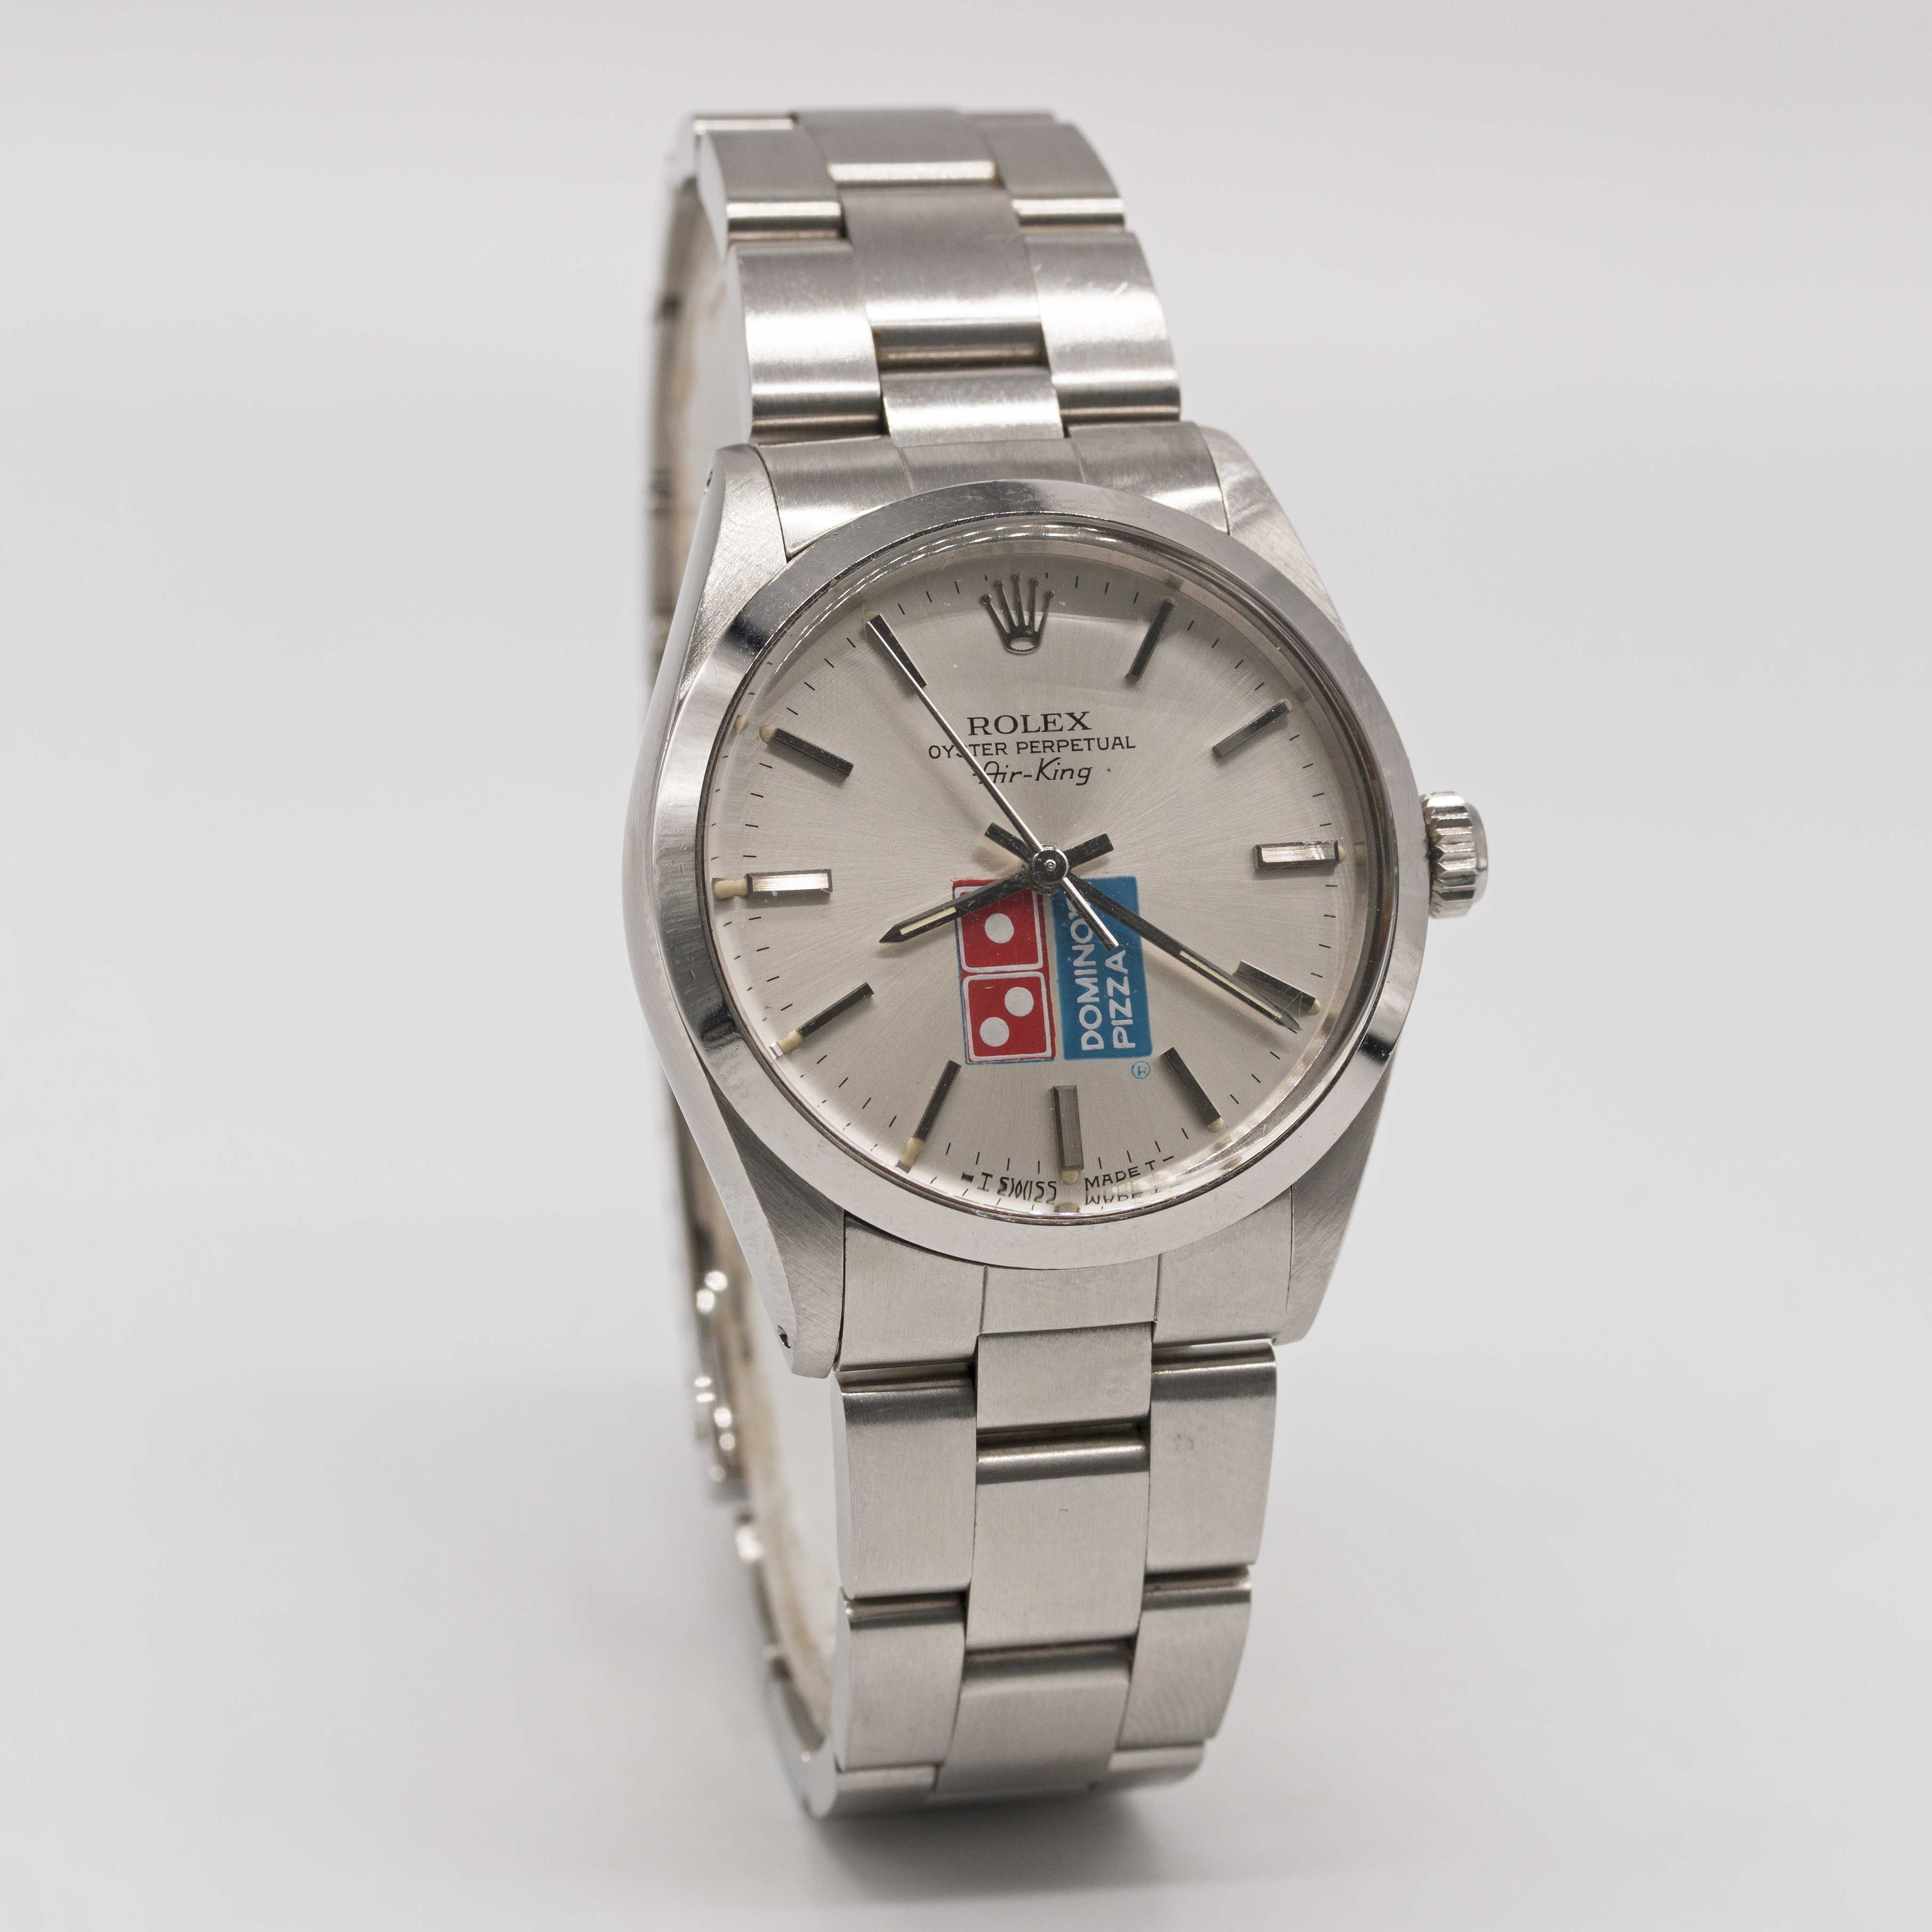 A RARE GENTLEMAN'S STAINLESS STEEL ROLEX OYSTER PERPETUAL AIR KING BRACELET WATCH CIRCA 1989, REF. - Image 6 of 11